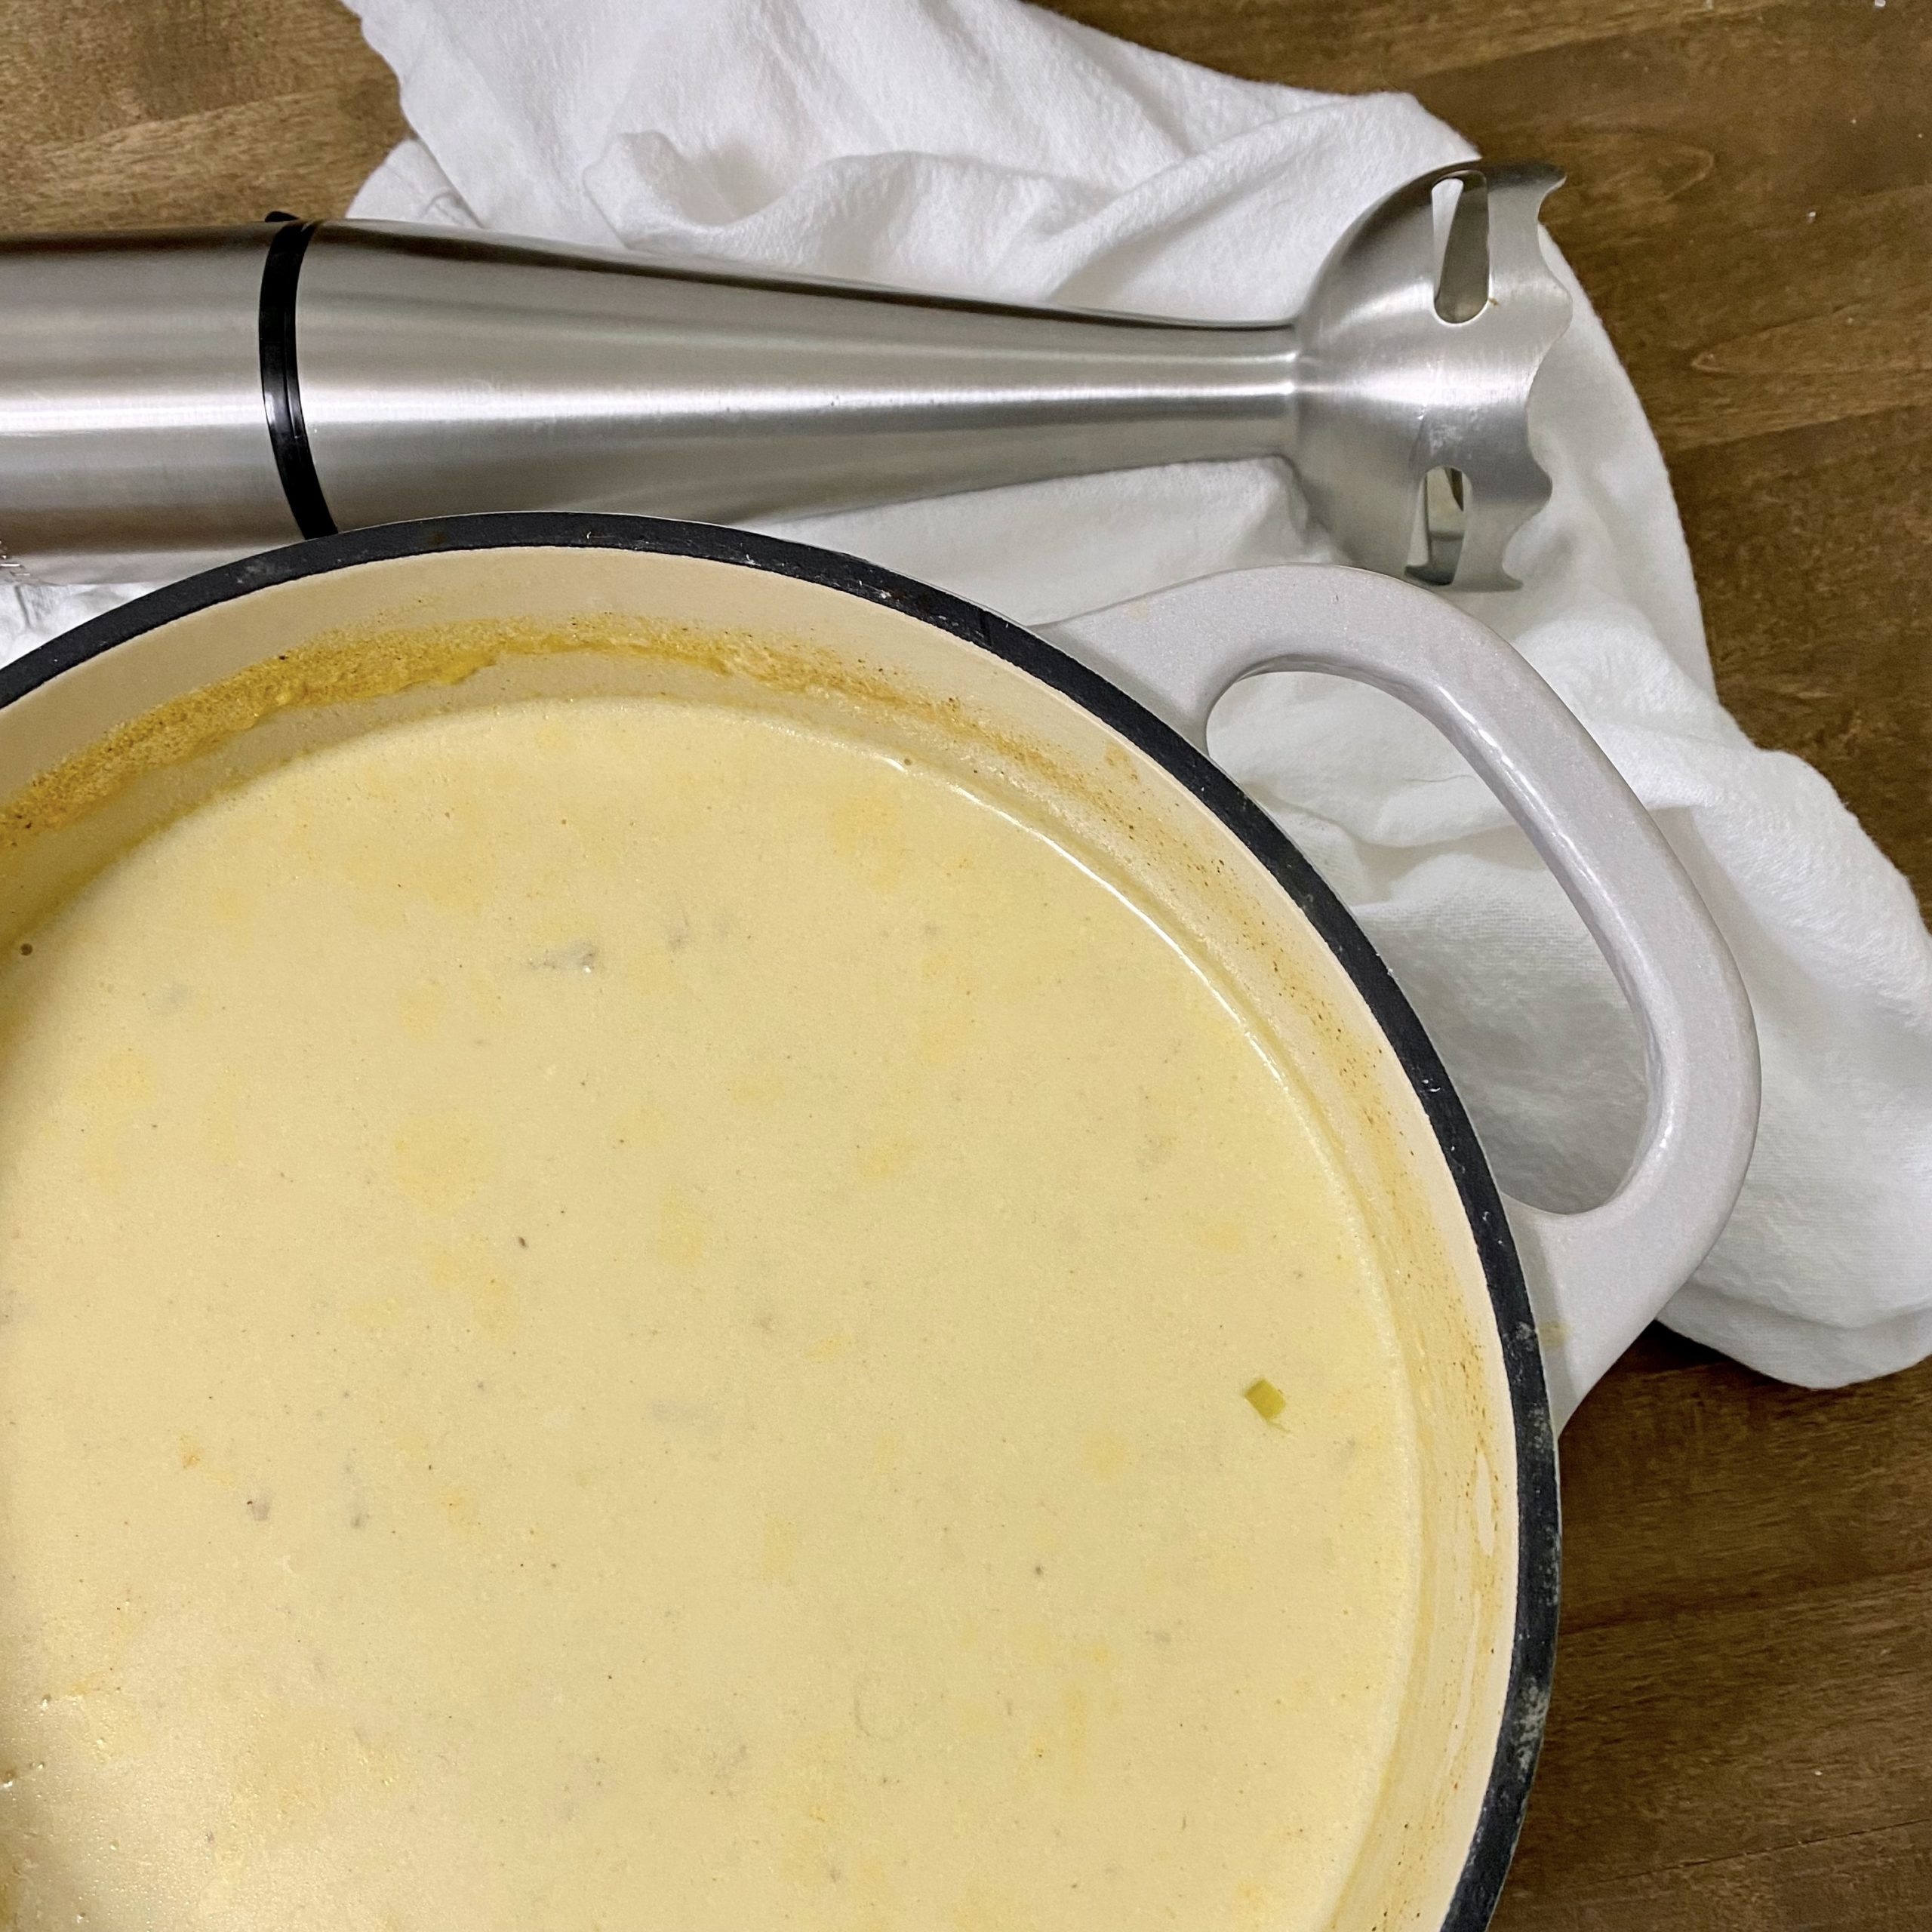 Pot of loaded potato soup on the counter with a white kitchen towel and immersion blender next to it.